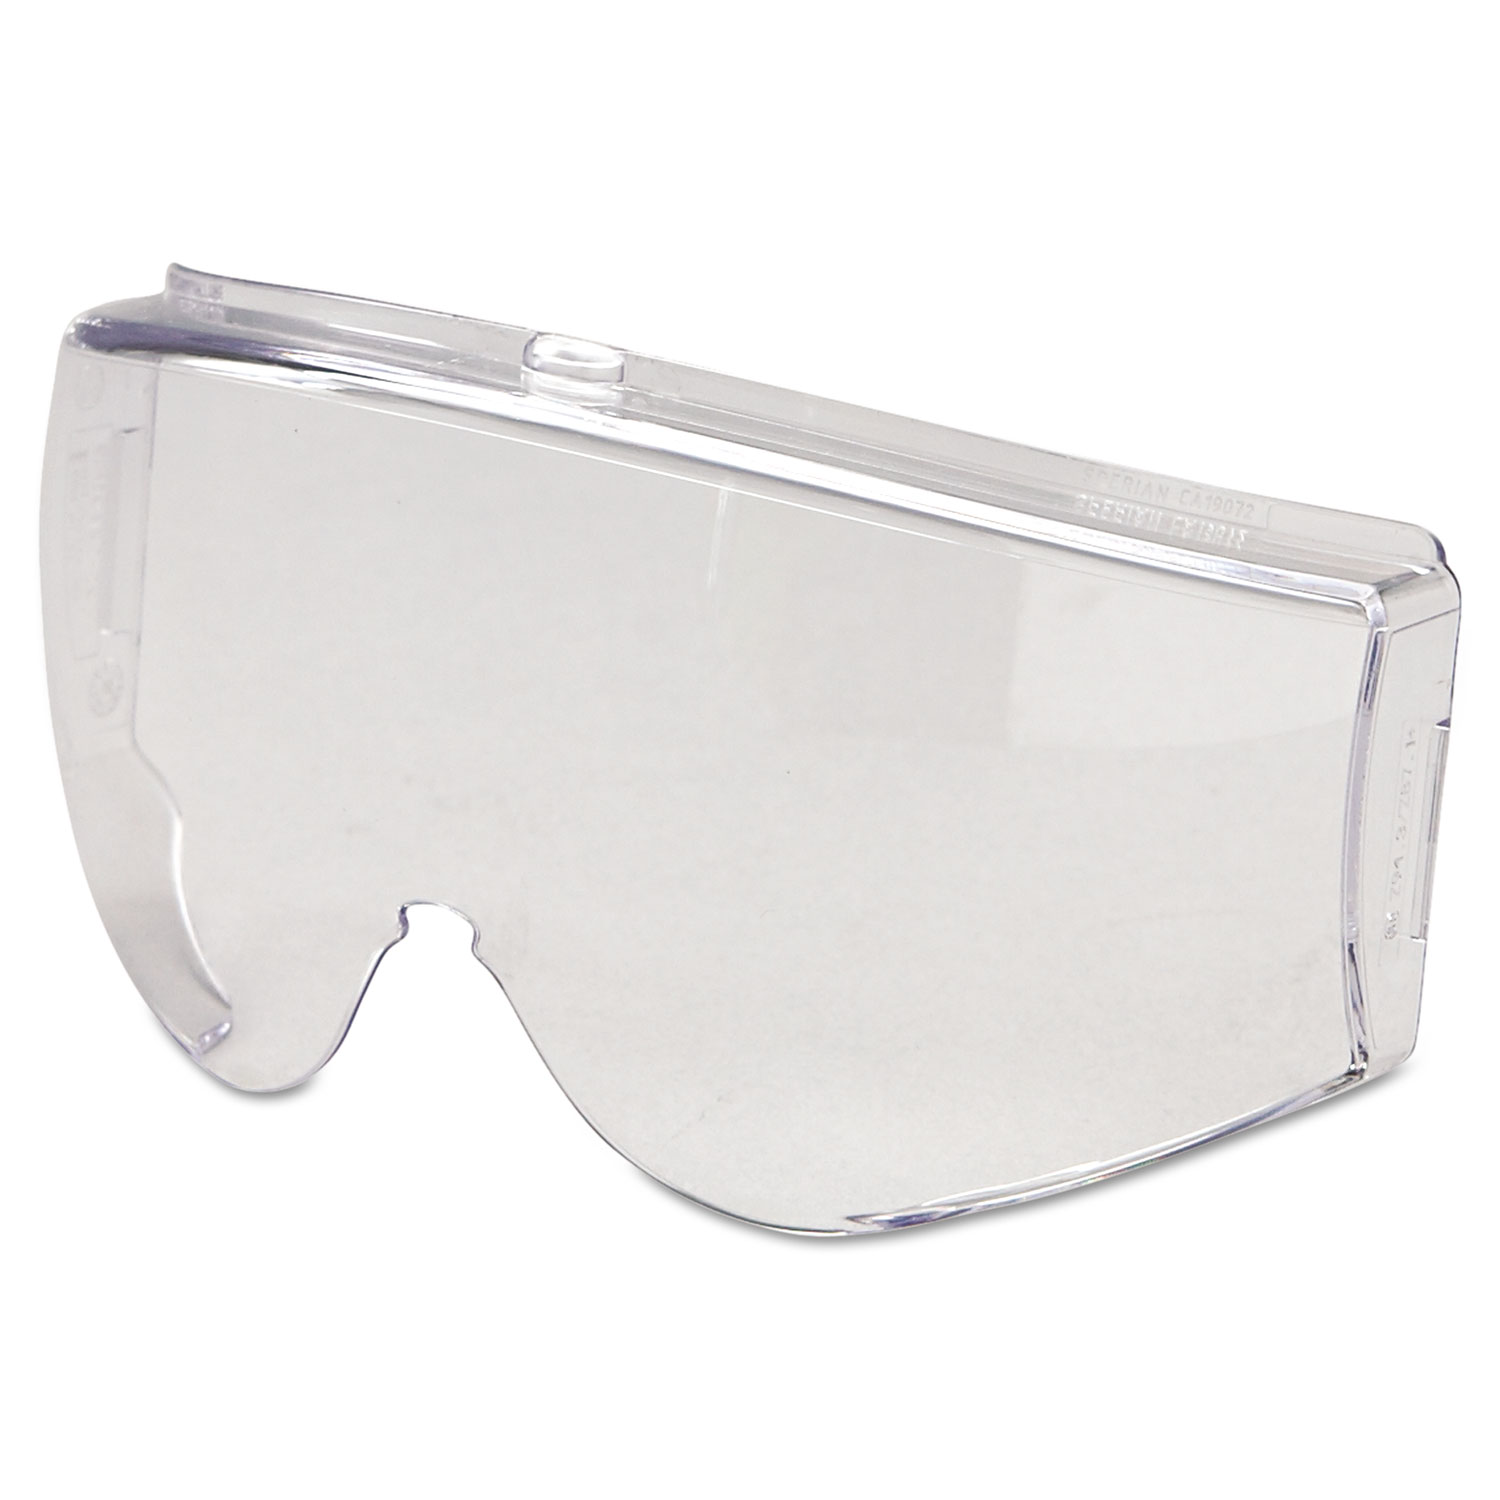  Honeywell Uvex S700C Stealth Safety Goggle Replacement Lenses, Clear Lens (UVXS700C) 